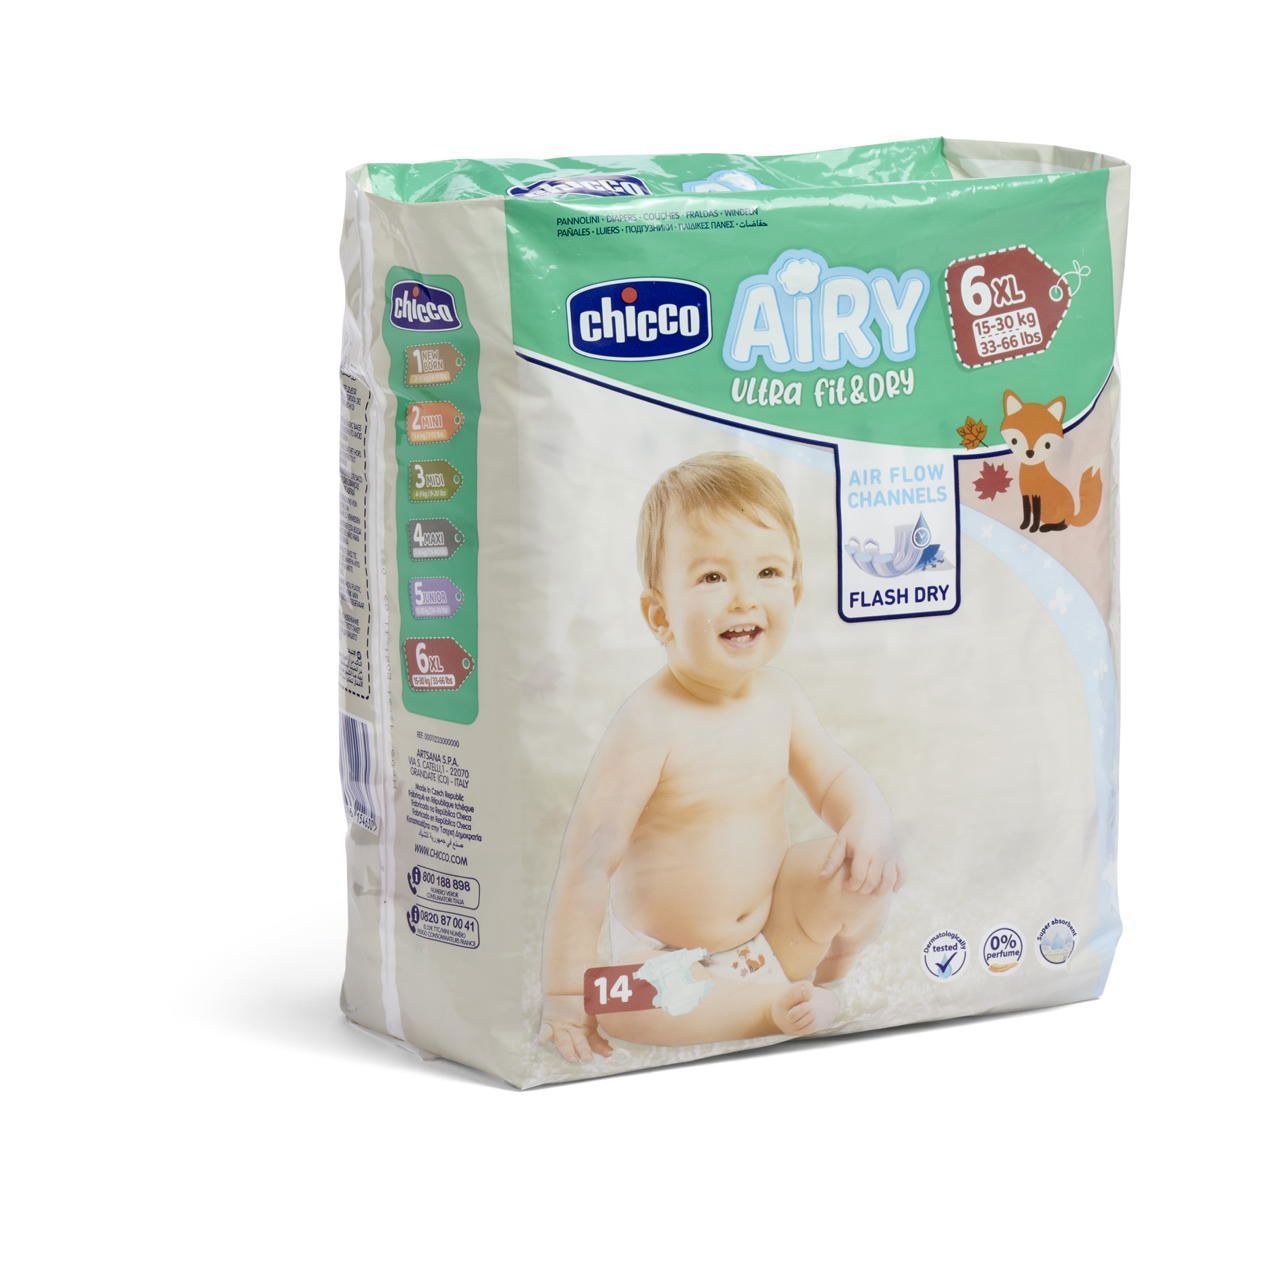 FRALDAS CHICCO AIRY - T6 - 14un image number 0